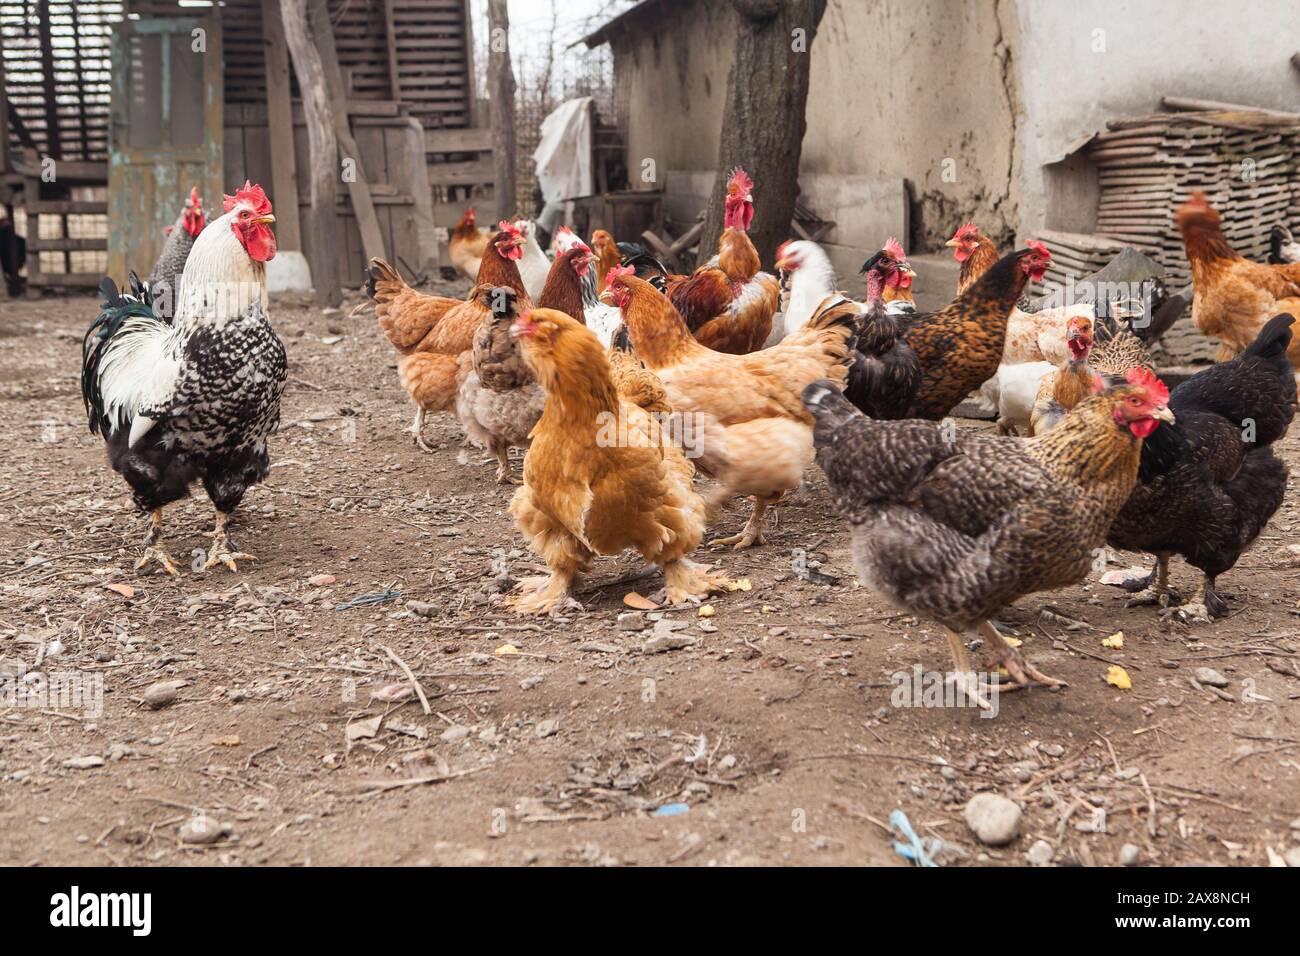 Small chicken farm in Eastern Europe Stock Photo